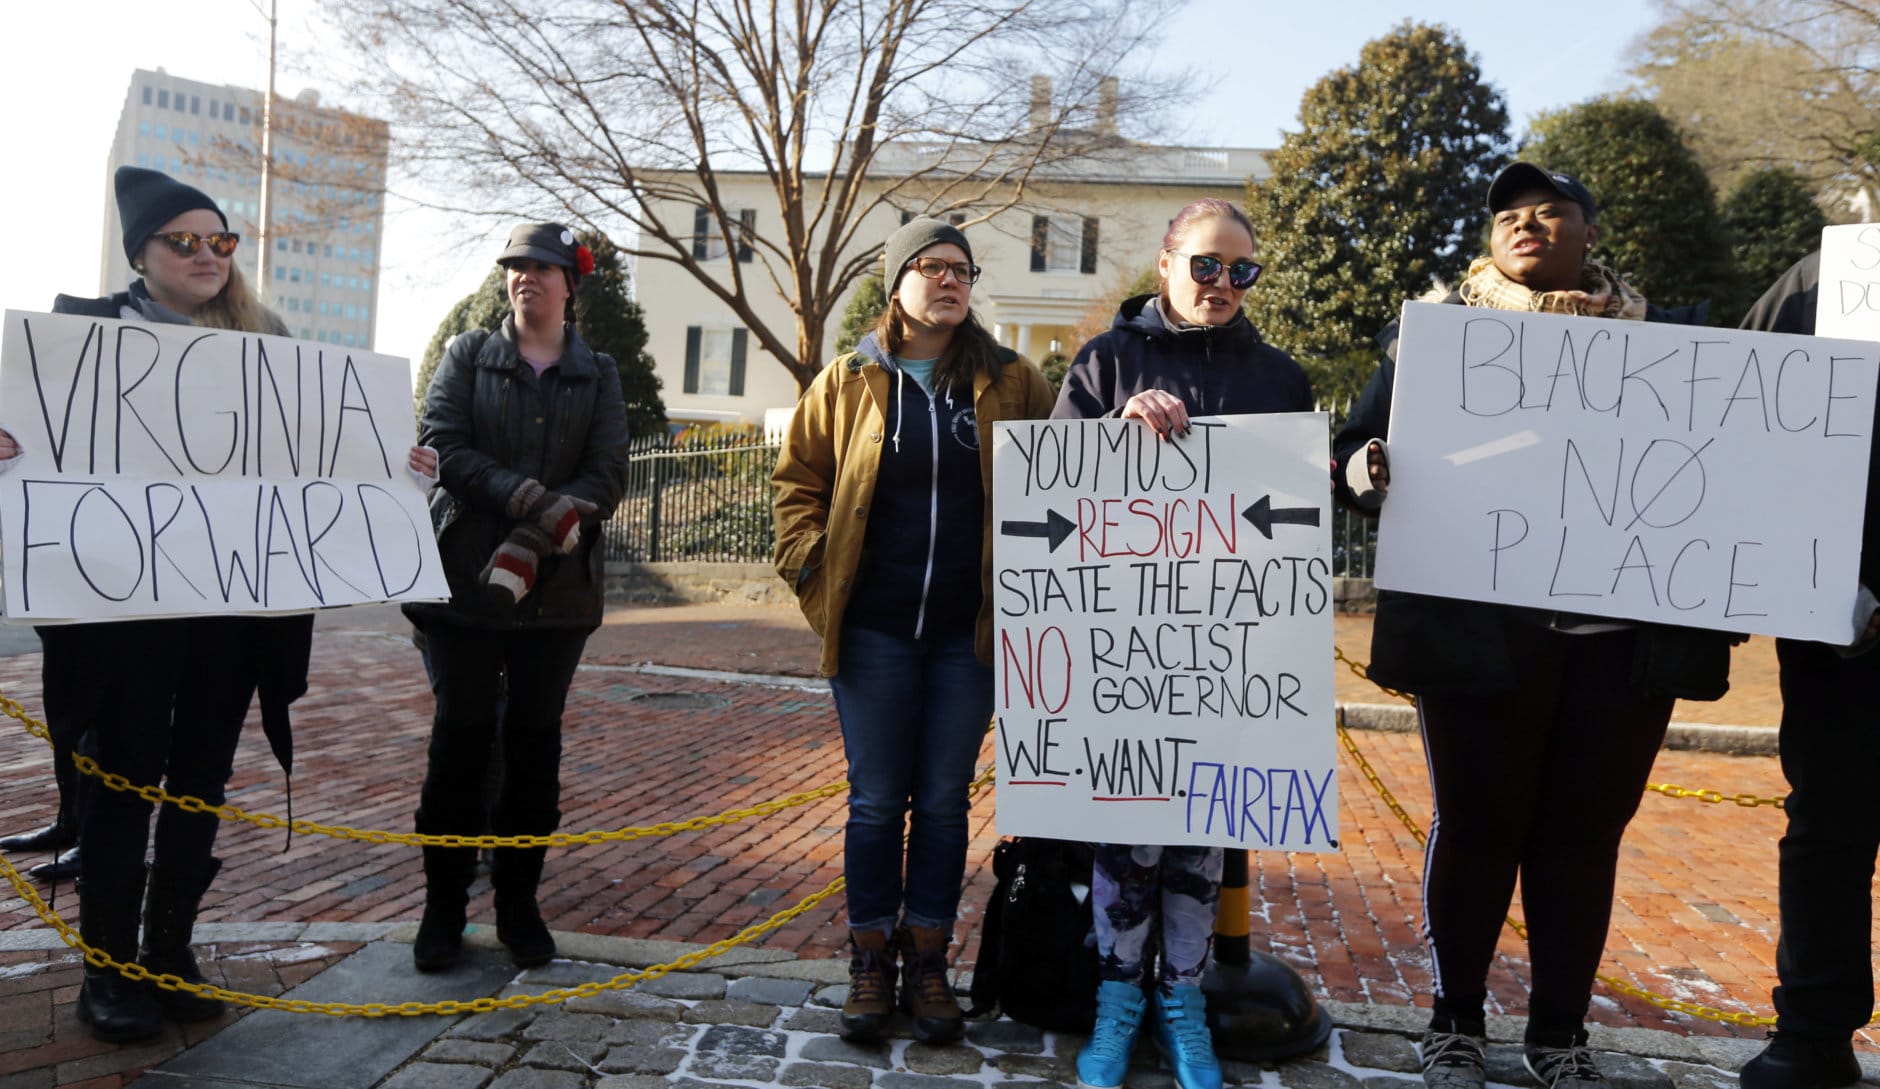 Demonstrators hold signs and chant outside the Governors Mansion at the Capitol in Richmond, Va., Saturday, Feb. 2, 2019. The demonstrators are calling for the resignation of Gov. Ralph Northam after a 30 year old photo of him on his medical school yearbook photo was widely distributed Friday. (AP Photo/Steve Helber)